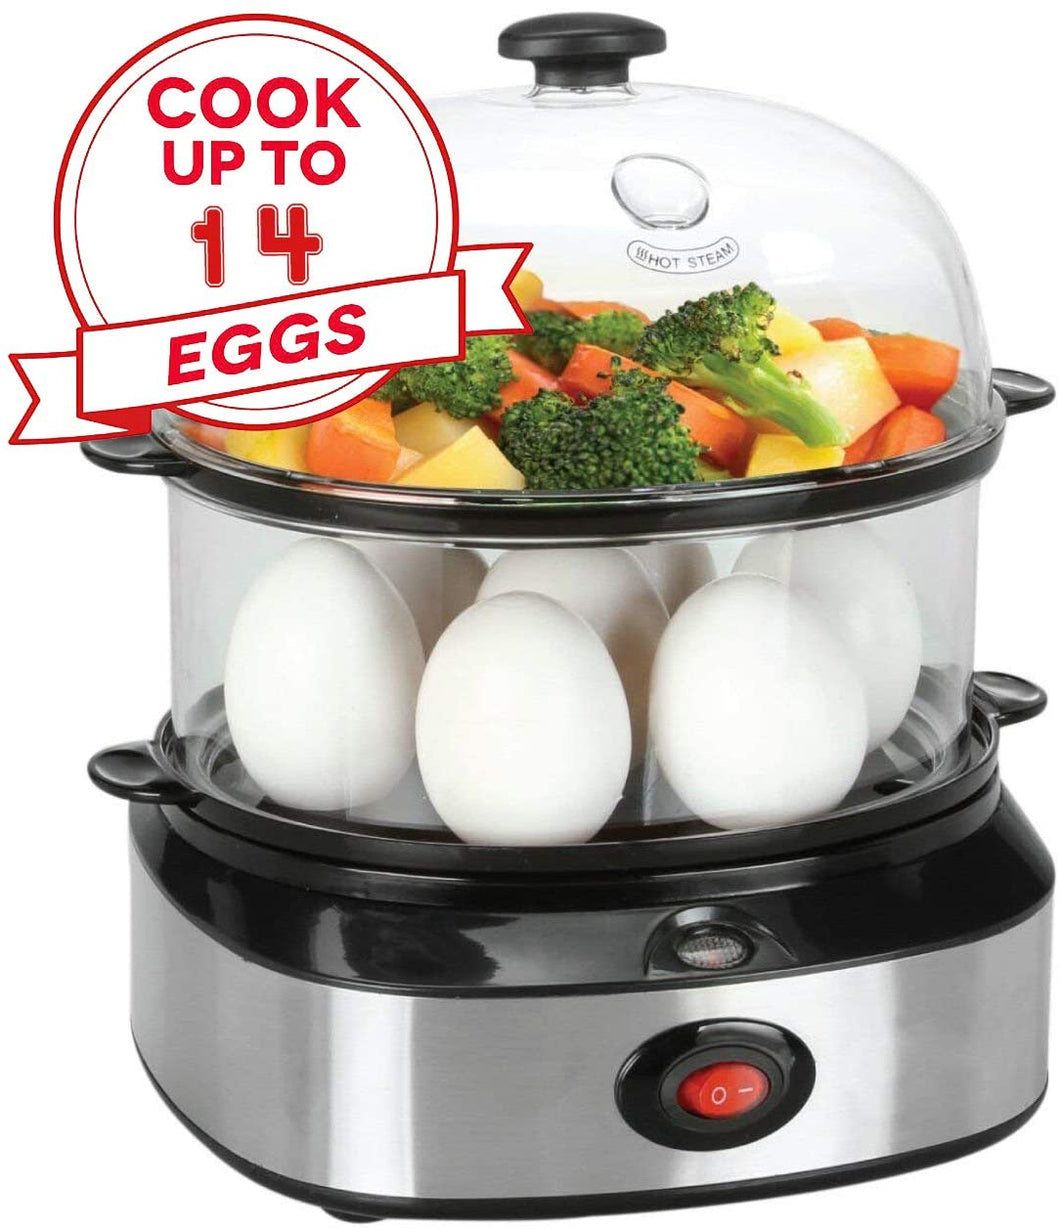 The 12 Best Egg Cookers For 2023 - RugKnots